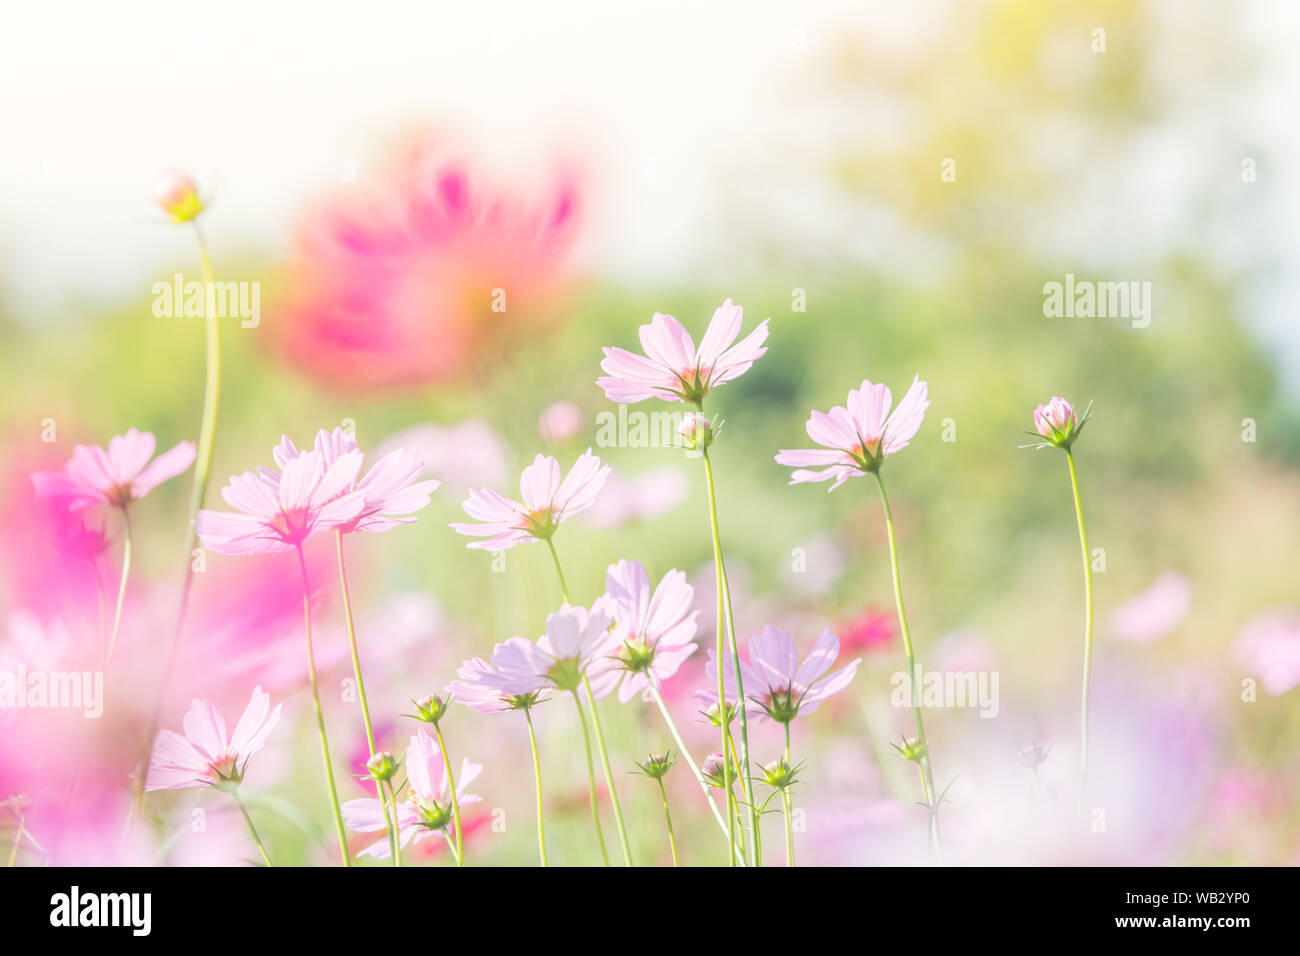 Cosmos flowers in nature, sweet background, blurry flower